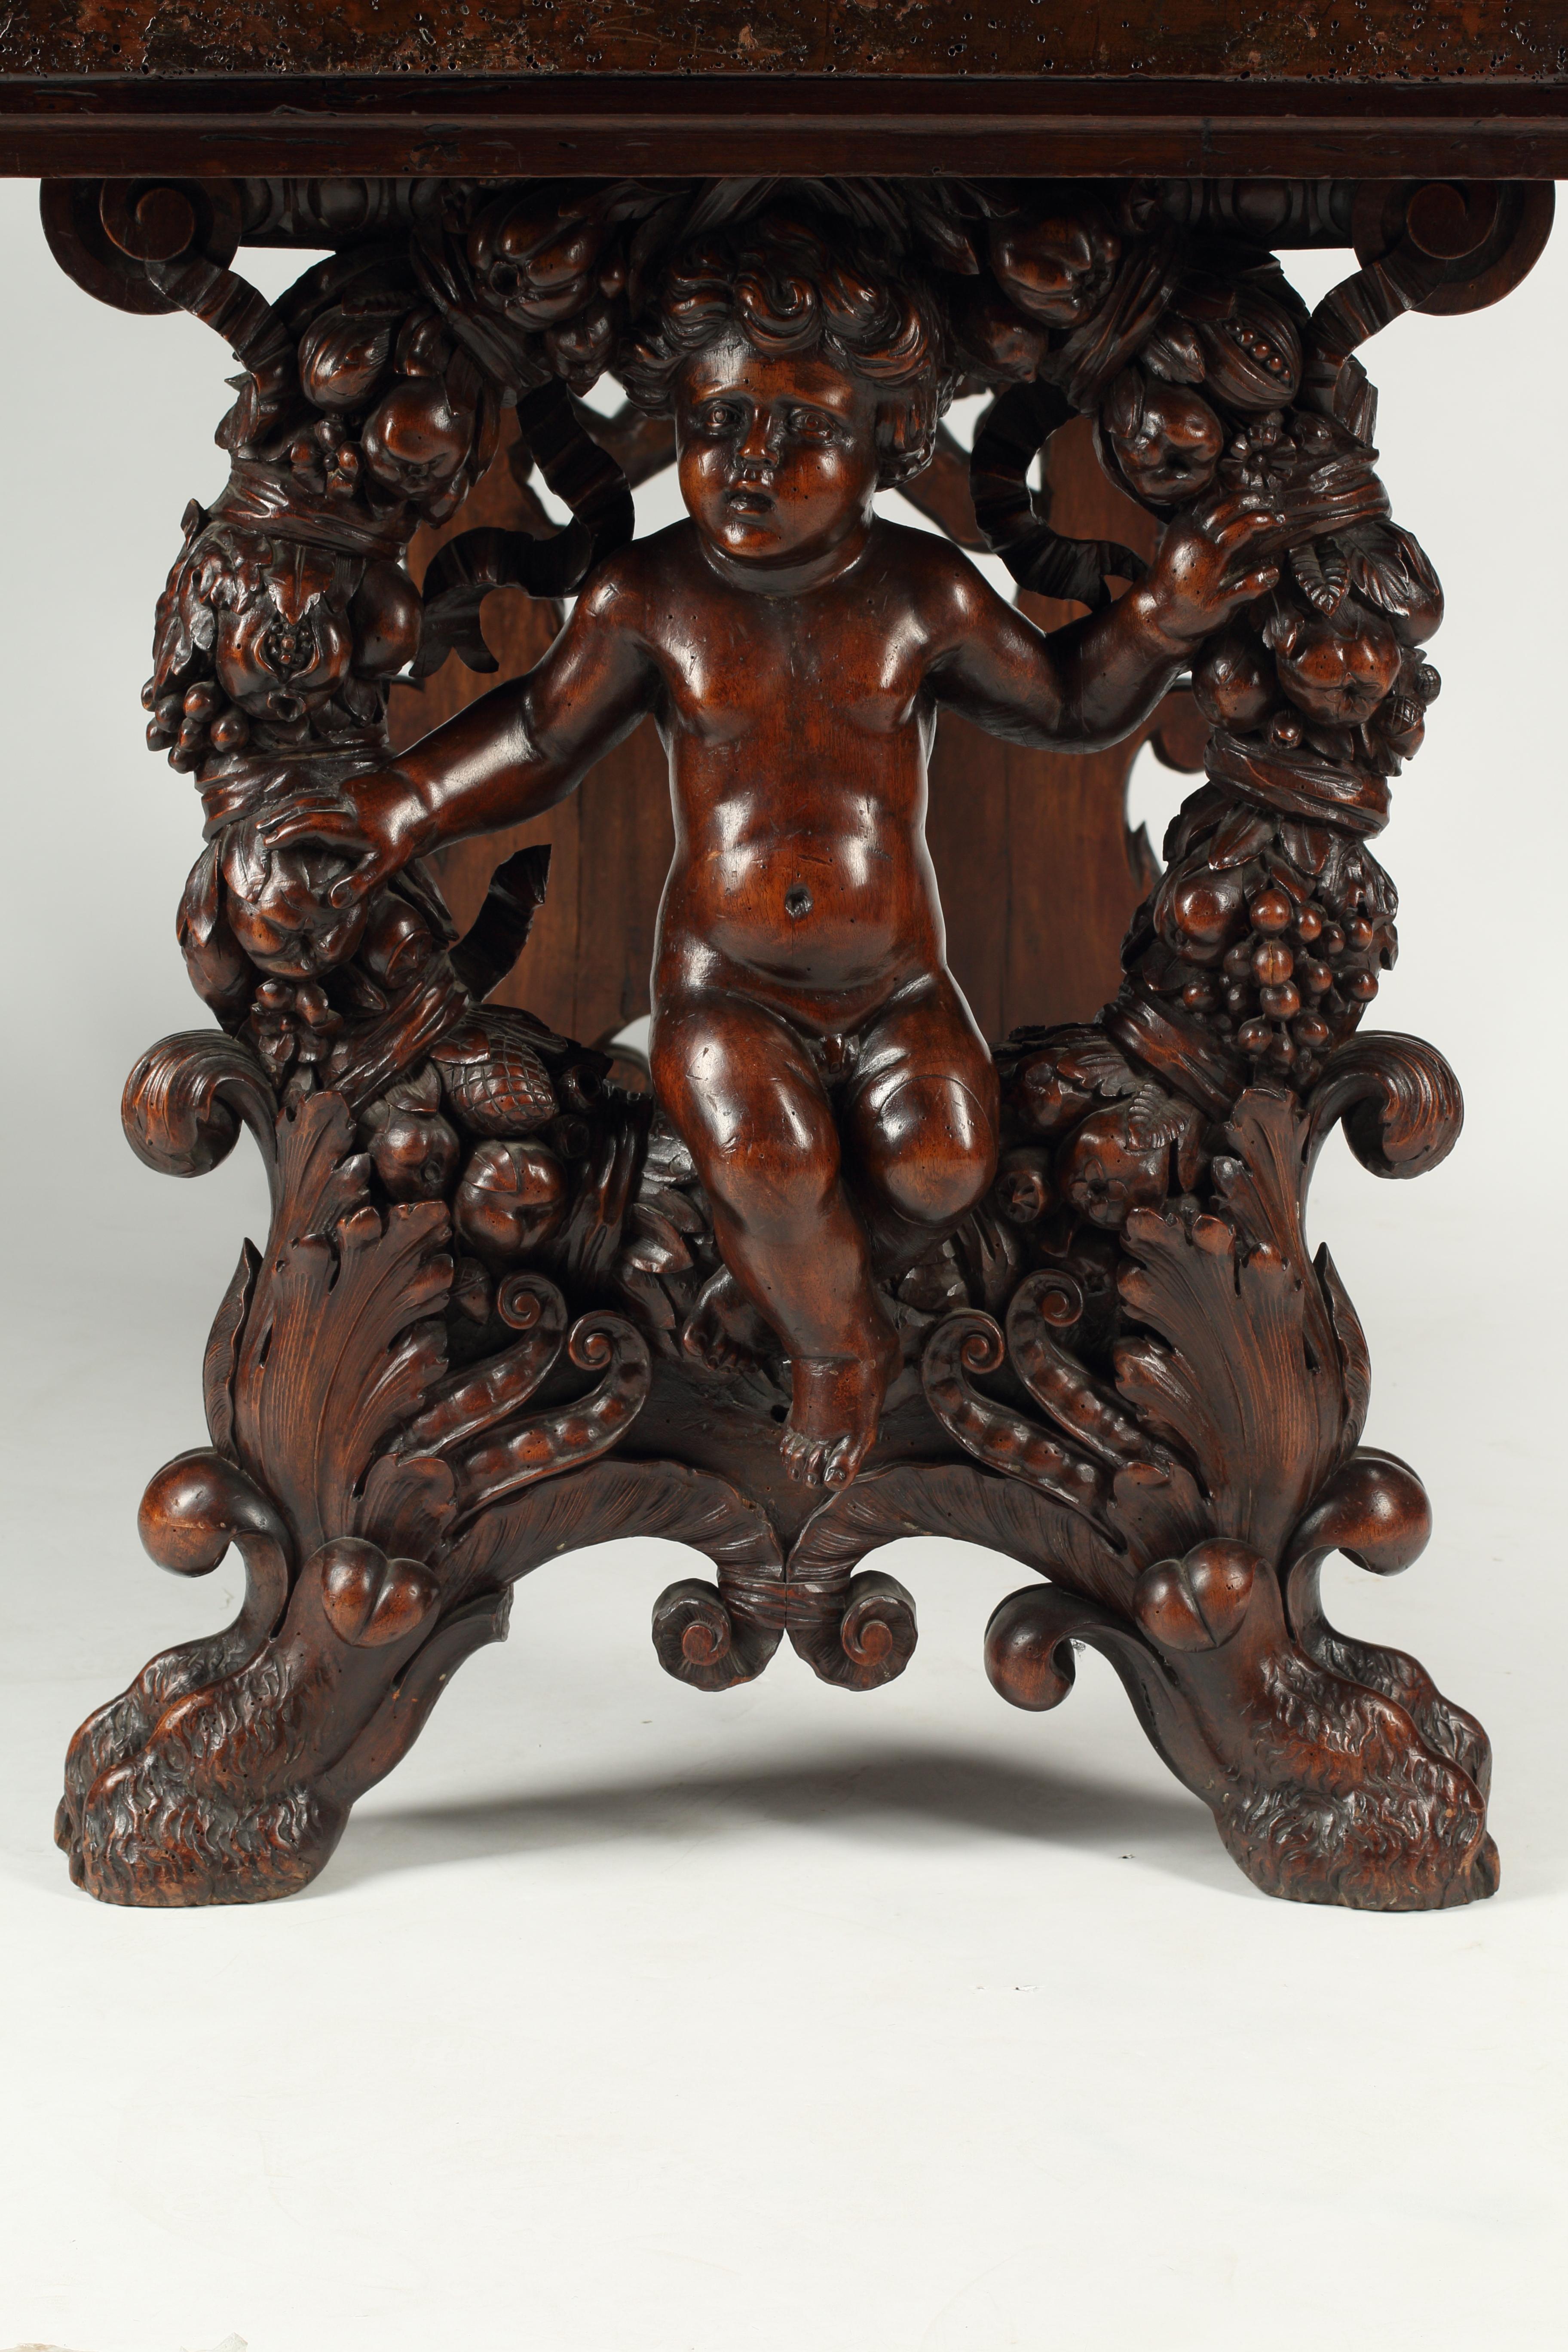 An impressive late 18th/early 19th century finely carved walnut trestle table with unusual intricately carved puttis on the sides.
Meticulous attention is given to the carving, sturdy and stable. Features a carved stretcher and lion's feet.